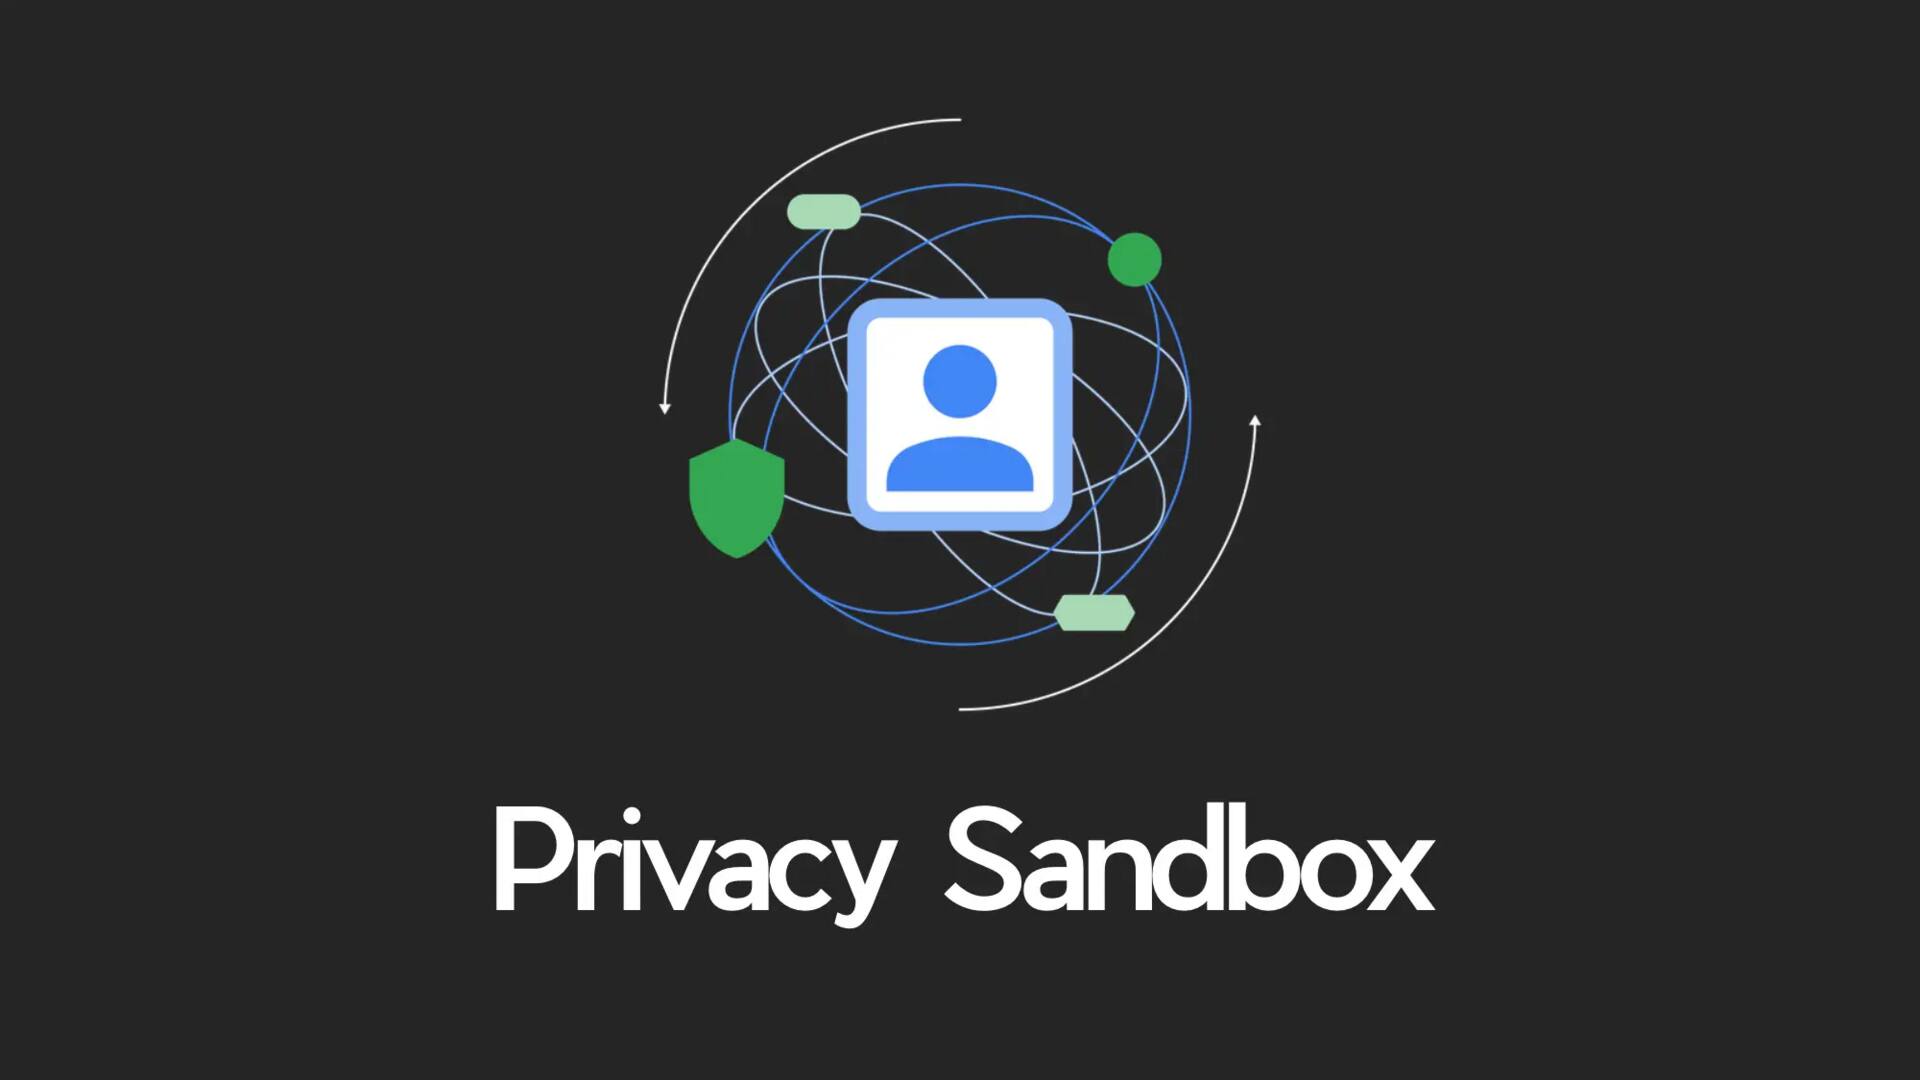 Google Chrome users receiving "Privacy Sandbox" pop-up: How it works